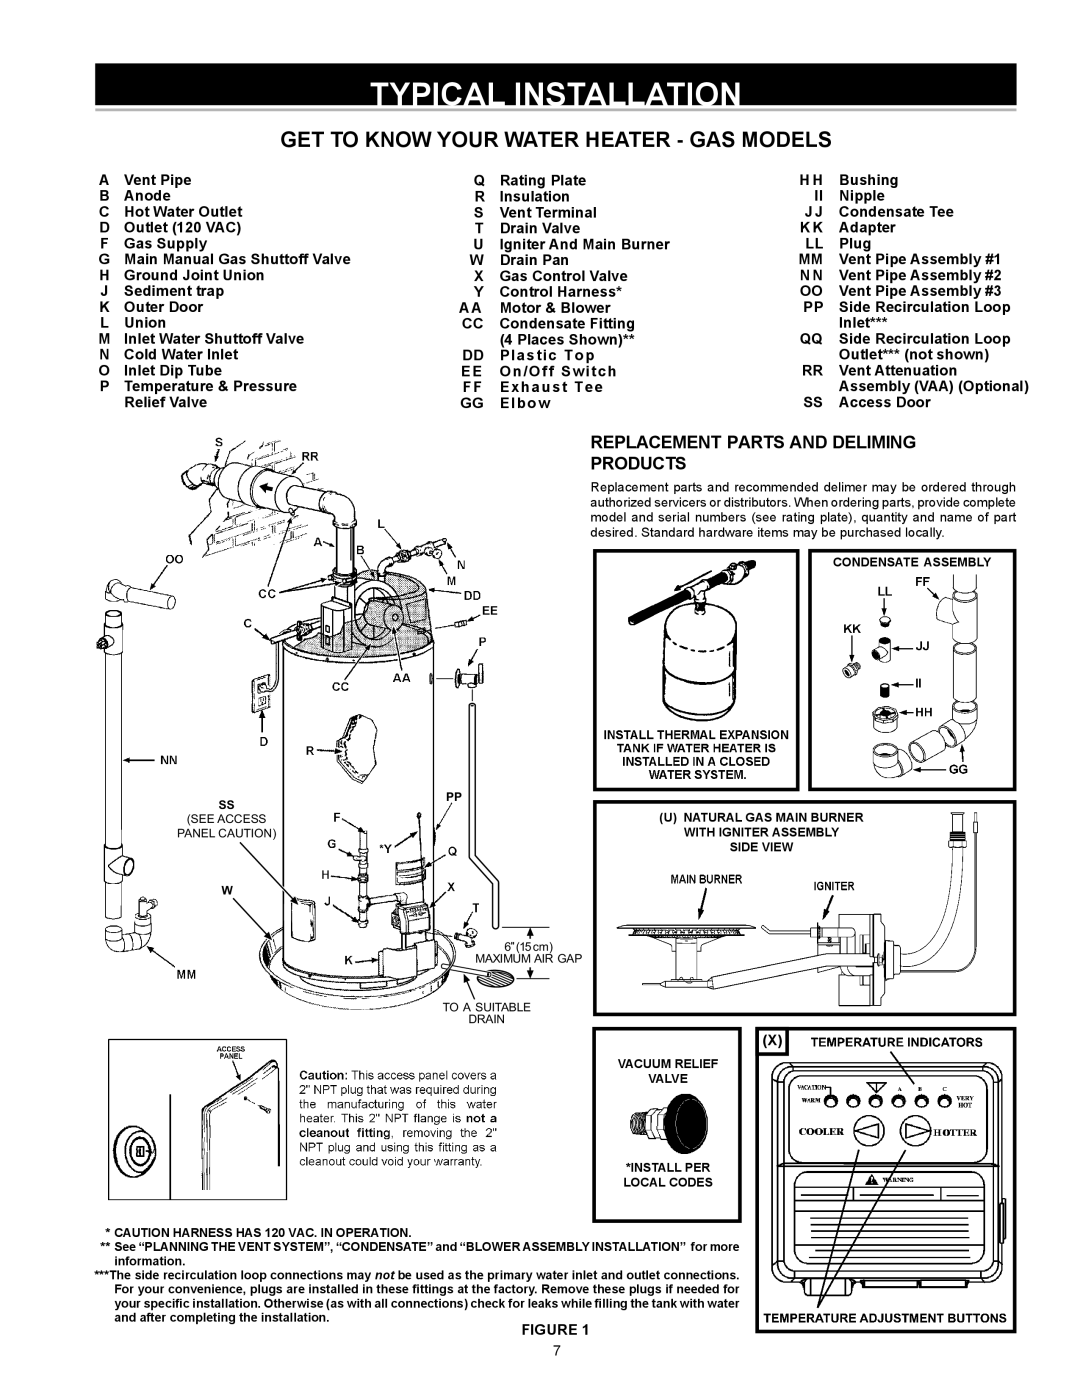 American Water Heater American Water Heaters Residential Gas Water Heater Typical Installation, Rating Plate, Bushing 